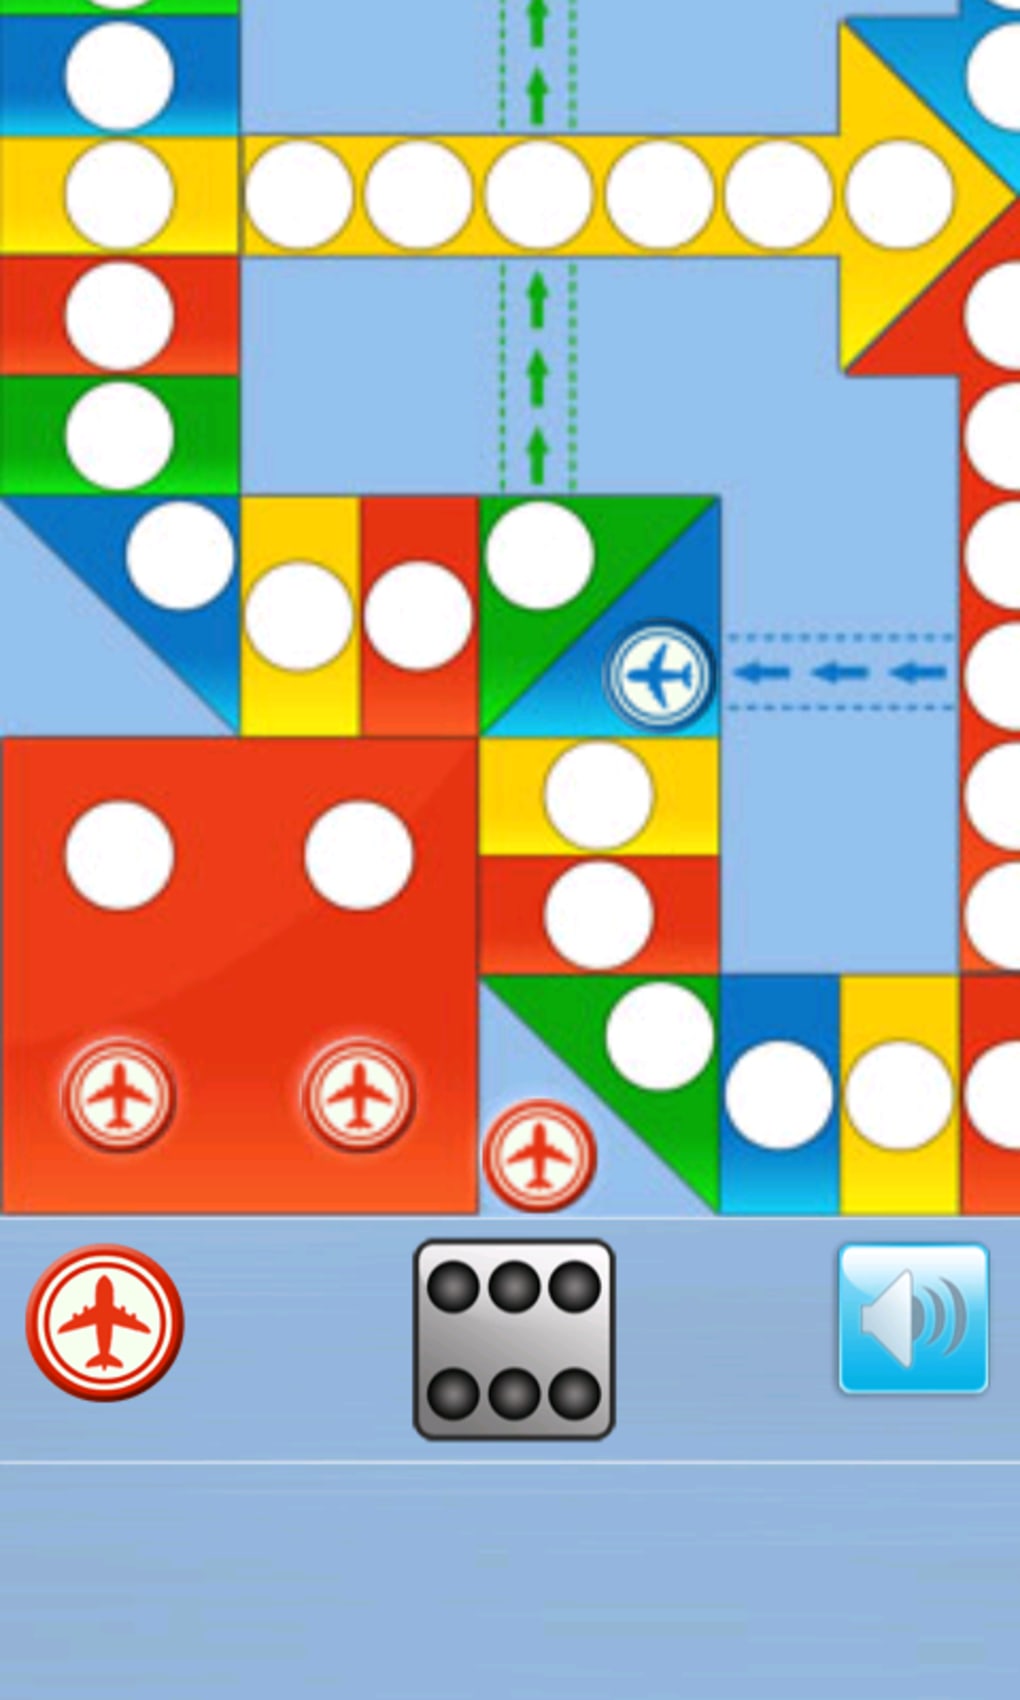 Battle Ludo Online Game for Android - Download